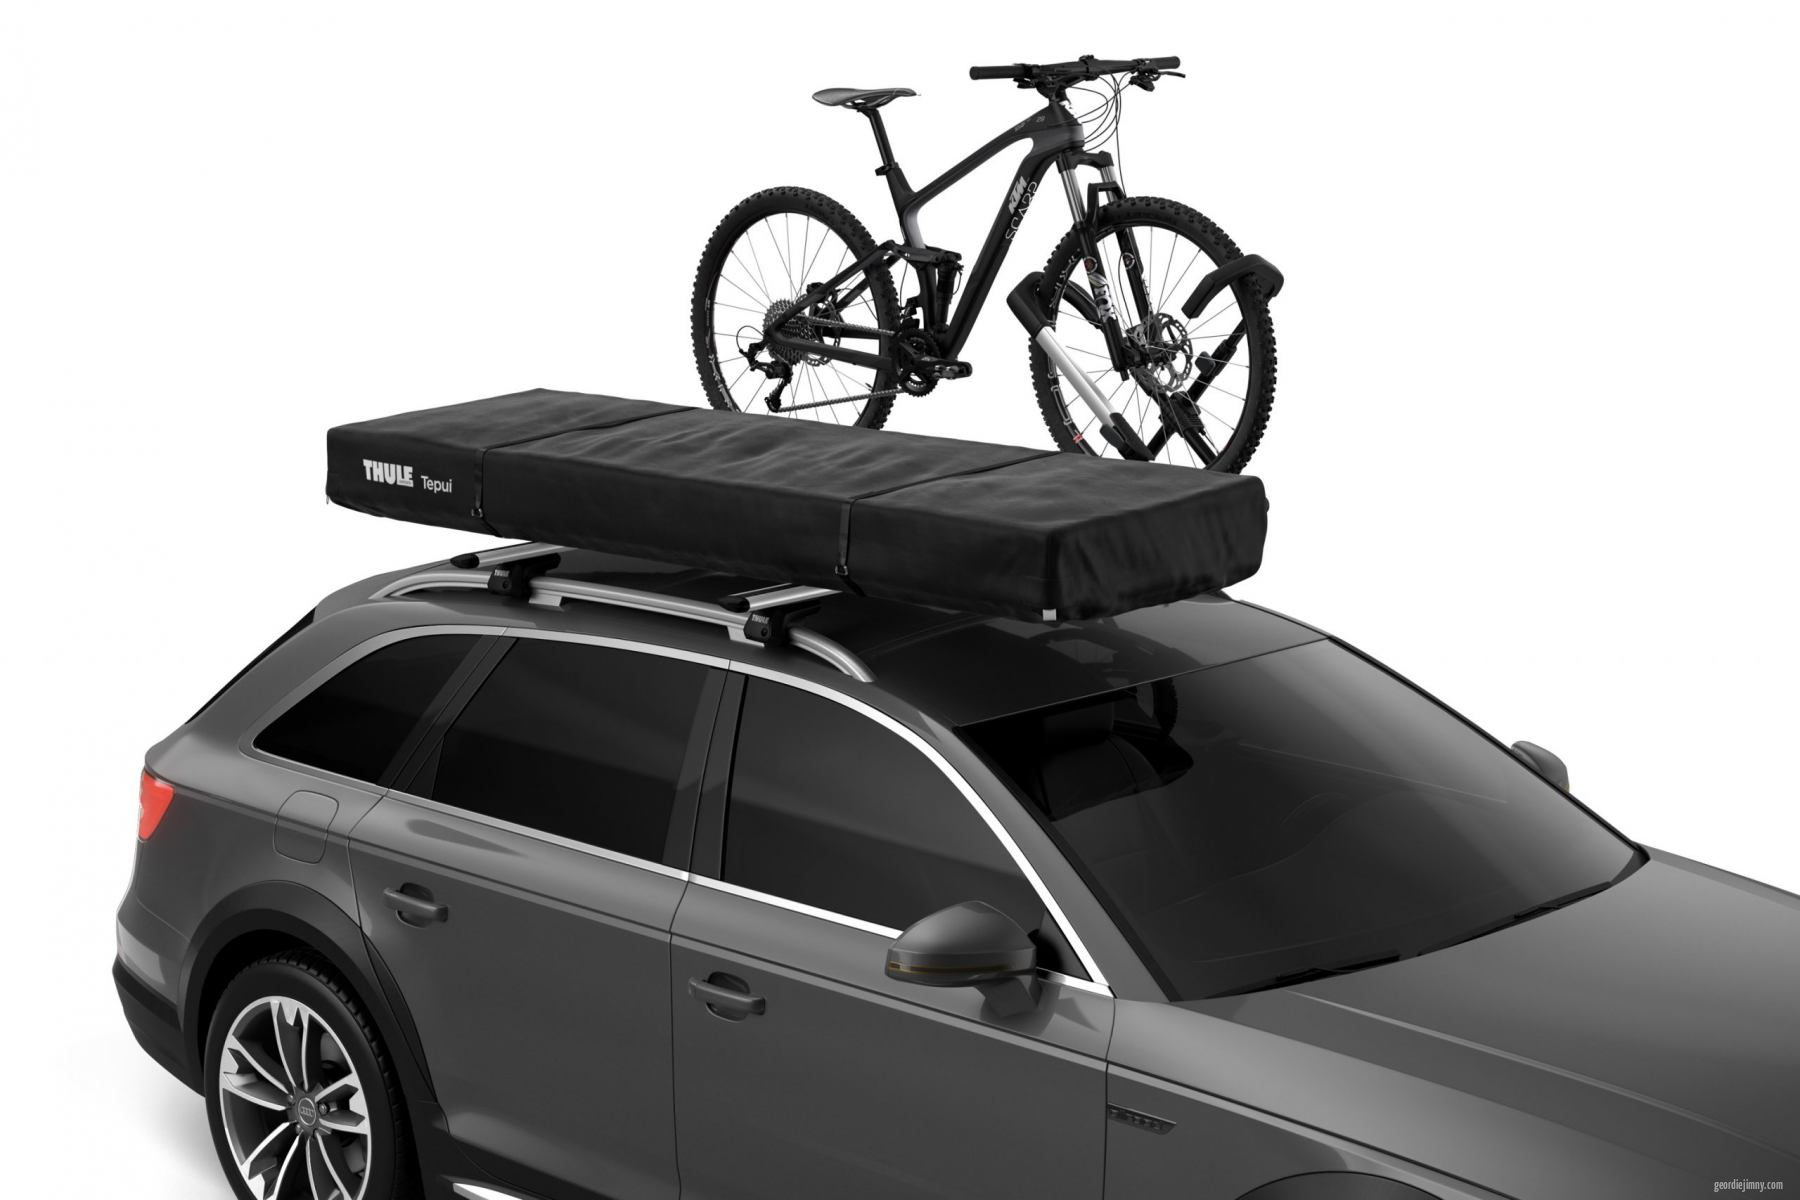 Thule are thinking a bit different